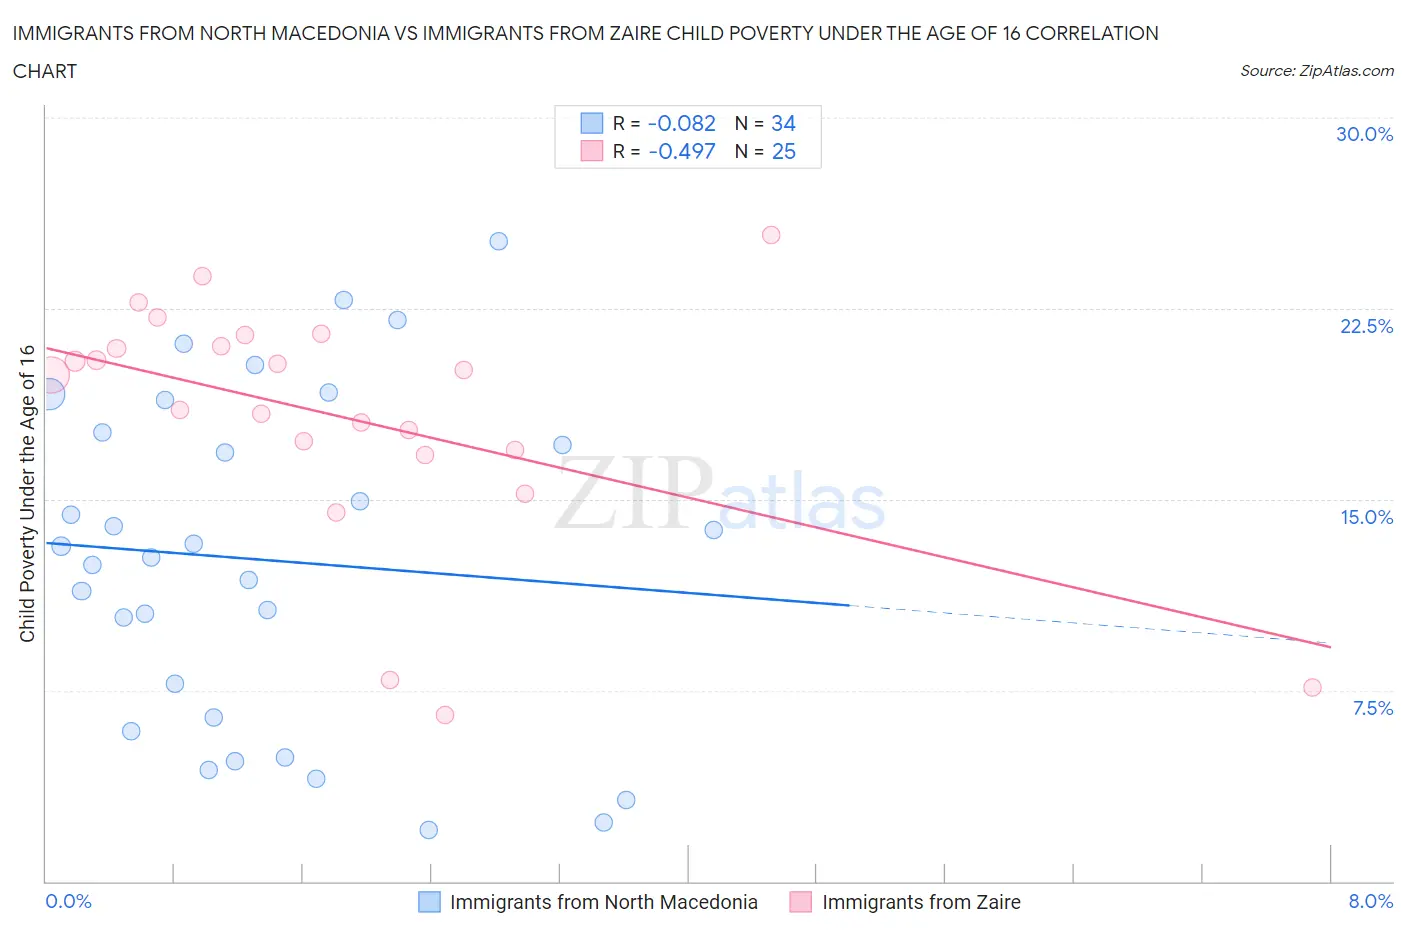 Immigrants from North Macedonia vs Immigrants from Zaire Child Poverty Under the Age of 16